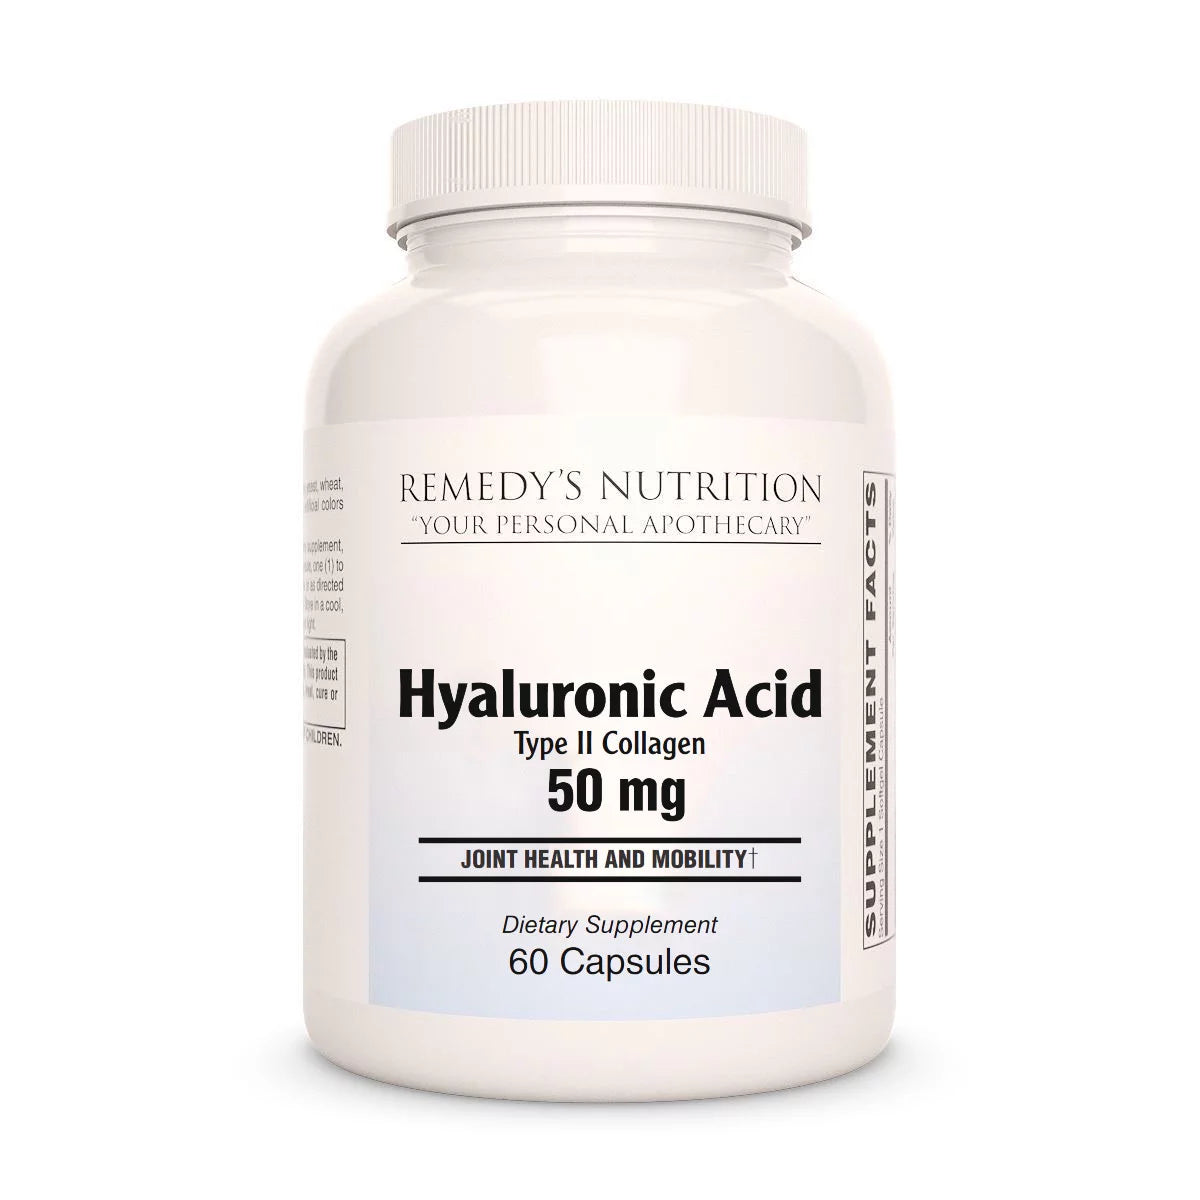 Image of Remedy's Nutrition® Hyaluronic Acid with Type II Collagen Capsules Dietary Supplement front bottle.